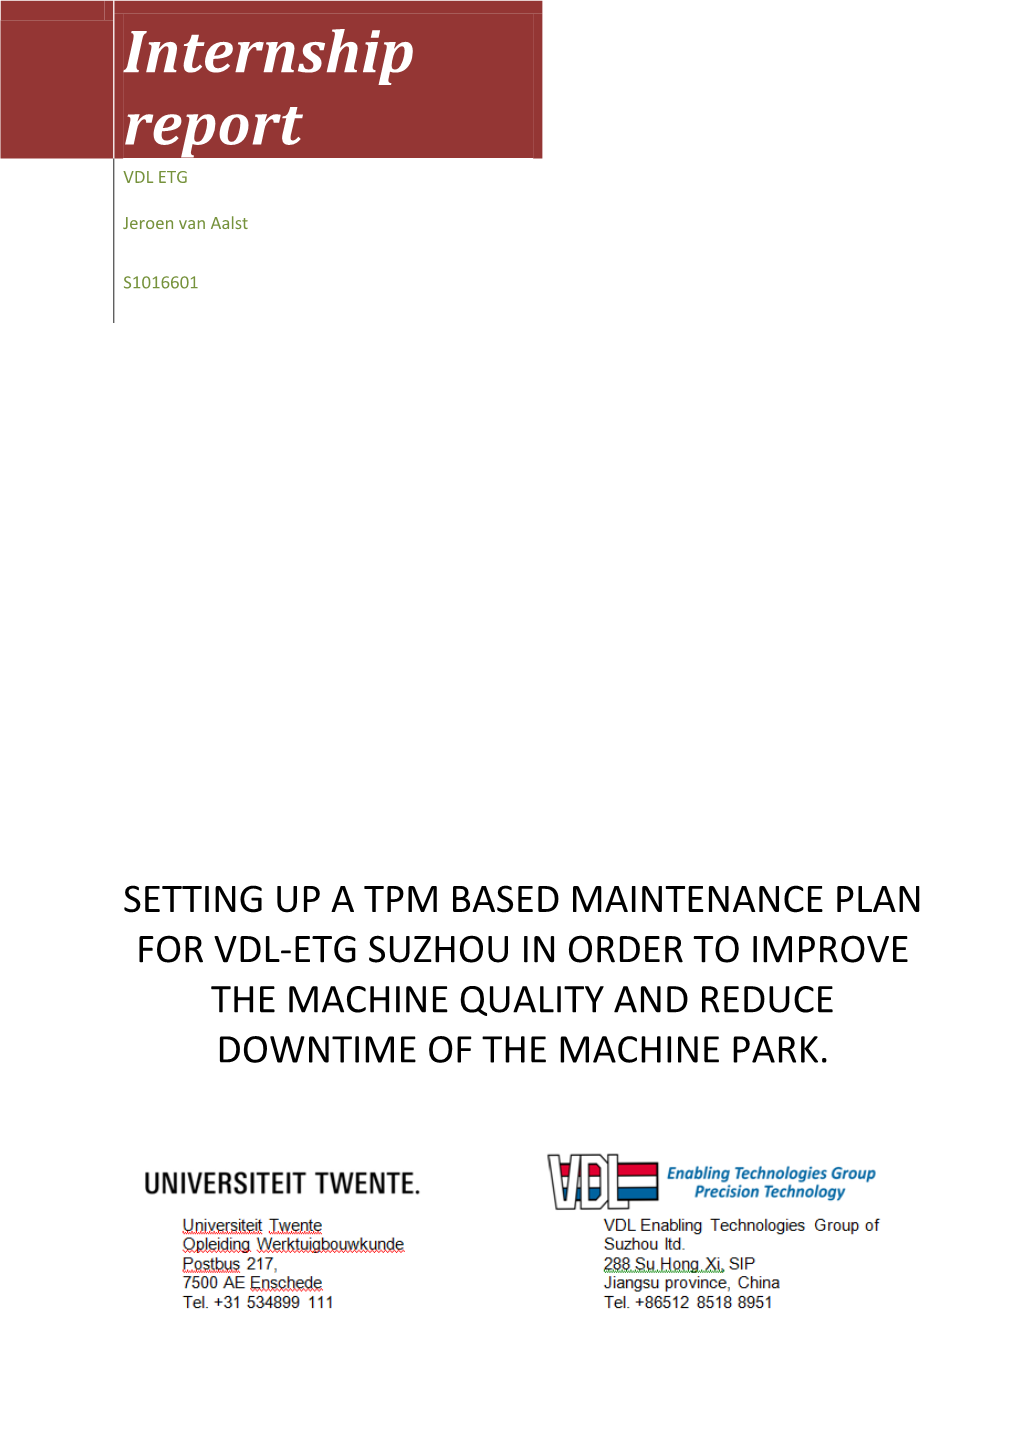 Setting up a Tpm Based Maintenance Plan for Vdl-Etg Suzhou in Order to Improve the Machine Quality and Reduce Downtime of the Machine Park